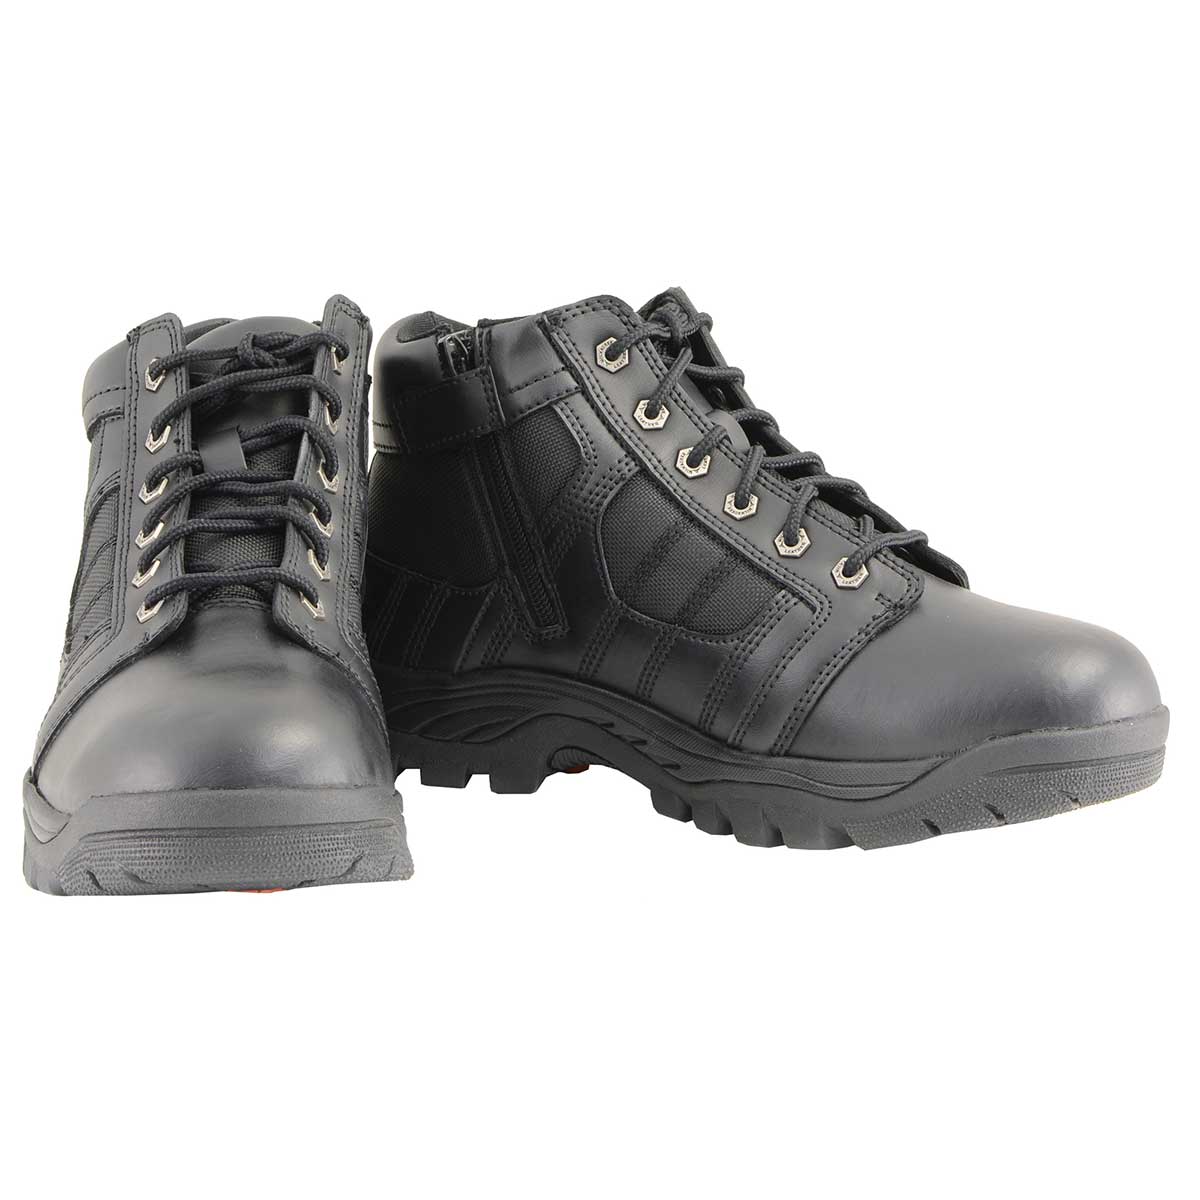 Milwaukee Leather MBM9131 Men’s Black Lace-Up Waterproof Swat Style-Tactical Motorcycle Shoes